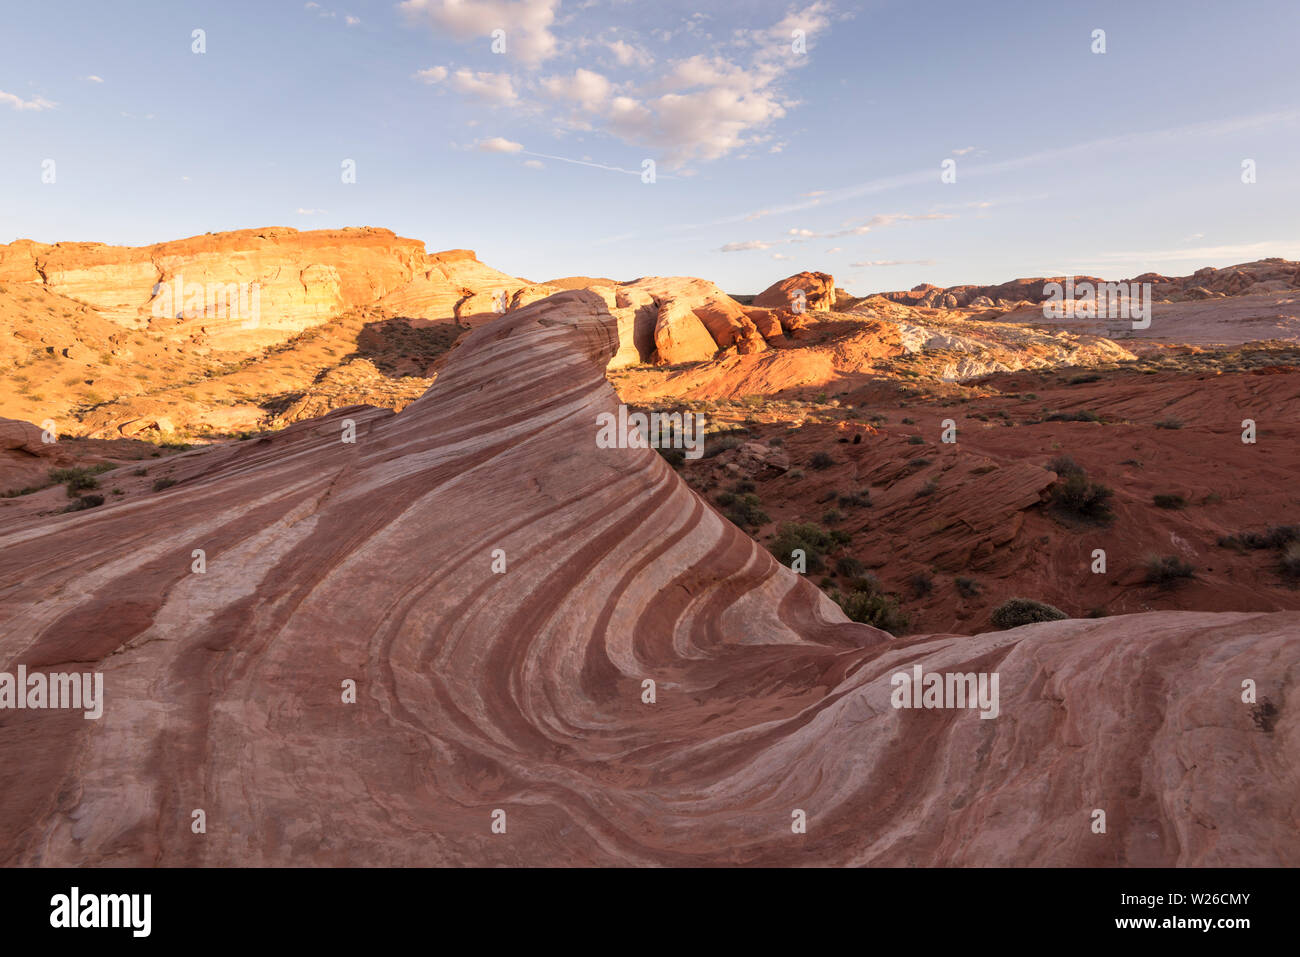 The Fire Wave rock formation. Valley of Fire State Park, Nevada, USA. Stock Photo